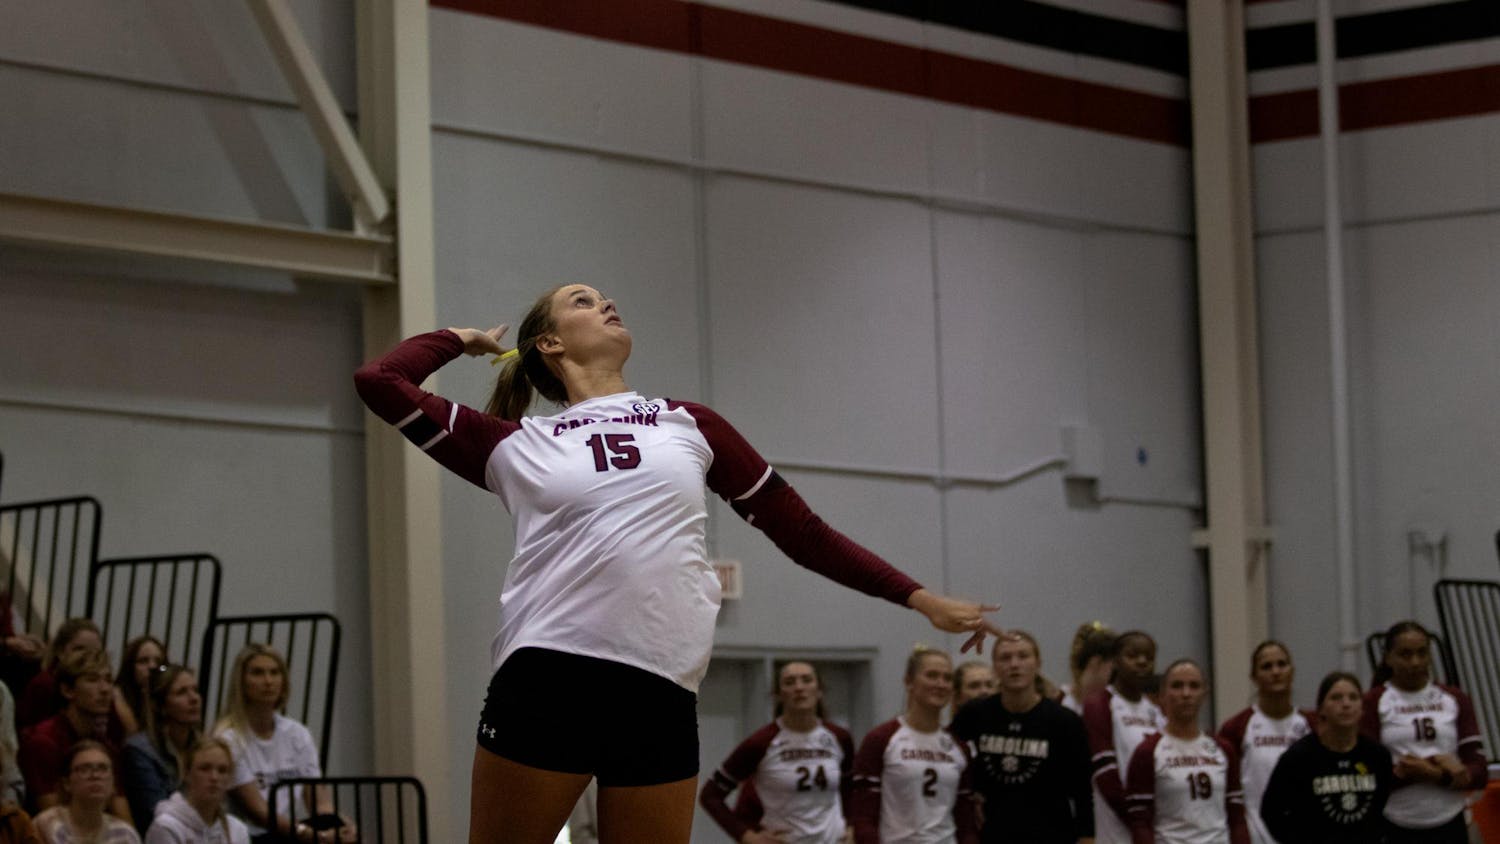 Junior setter Claire Wilson serves the ball to initiate a point at the Carolina Volleyball Center on Oct. 8, 2023. The Gamecocks fell to the Tigers 3-2 in a five set match.